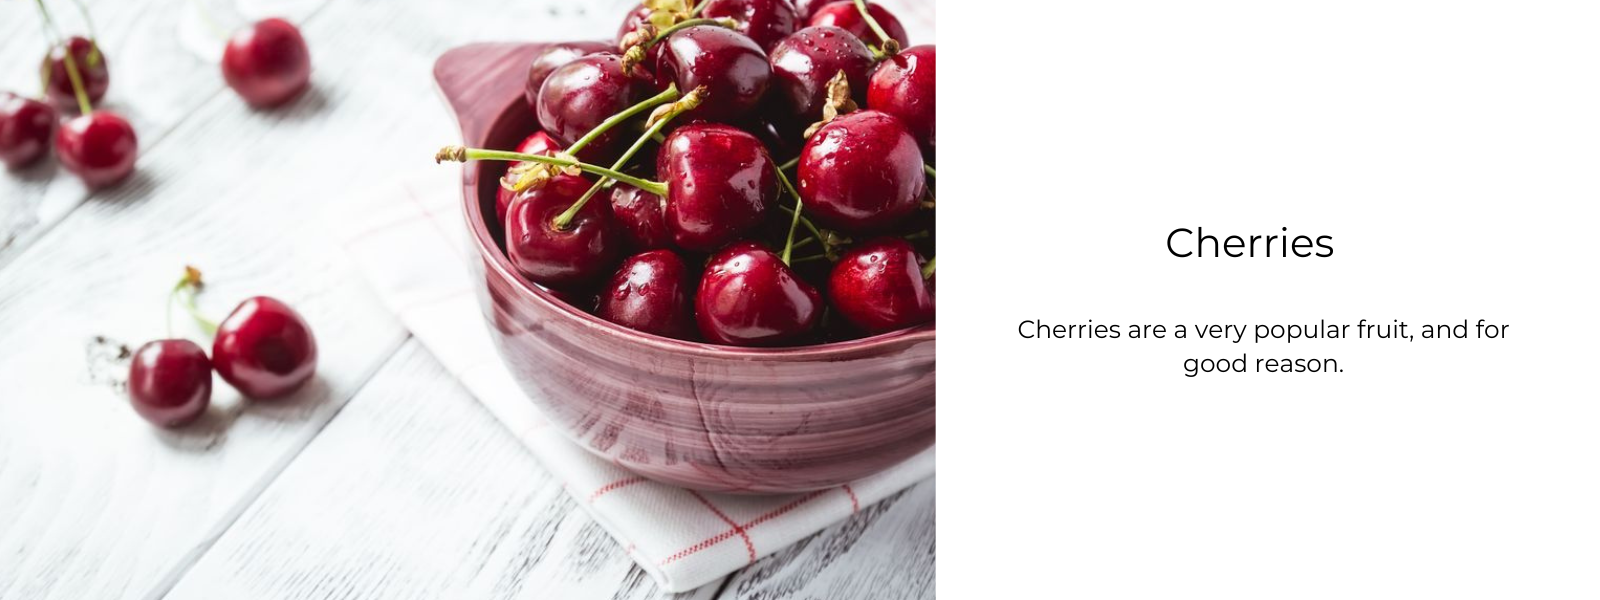 Cherries  - Health Benefits, Uses and Important Facts